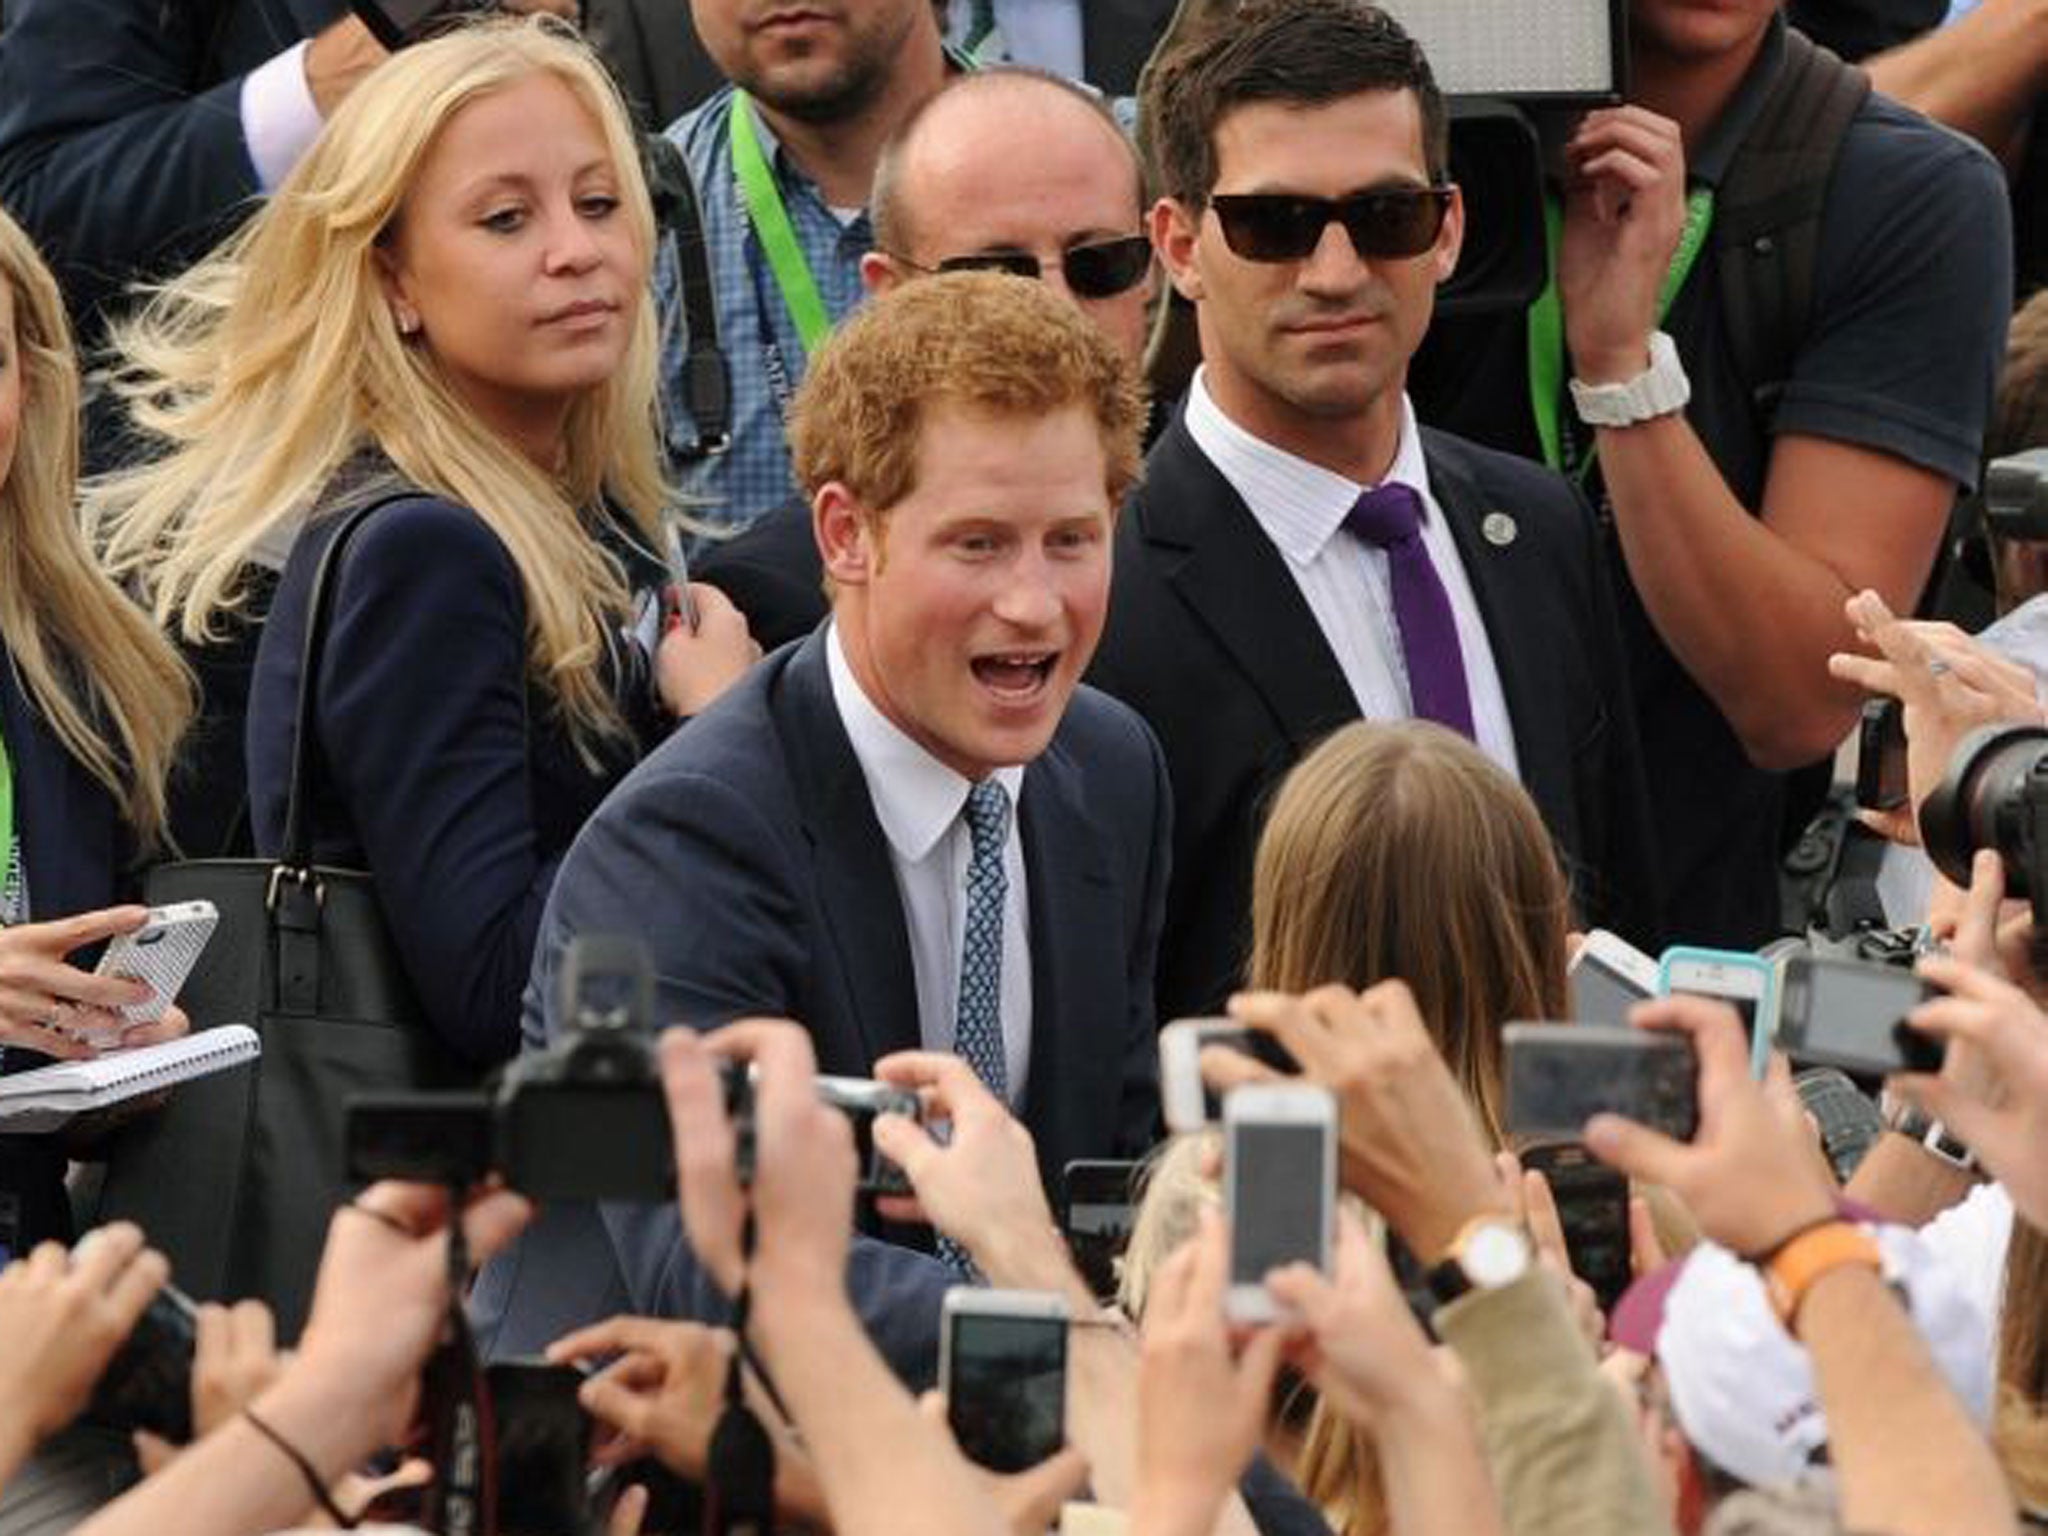 Prince Harry, who is in Sydney representing the Royal family at the International Fleet Review, meets members of the public during a walk about at Campbell's Cove in Sydney Harbour.